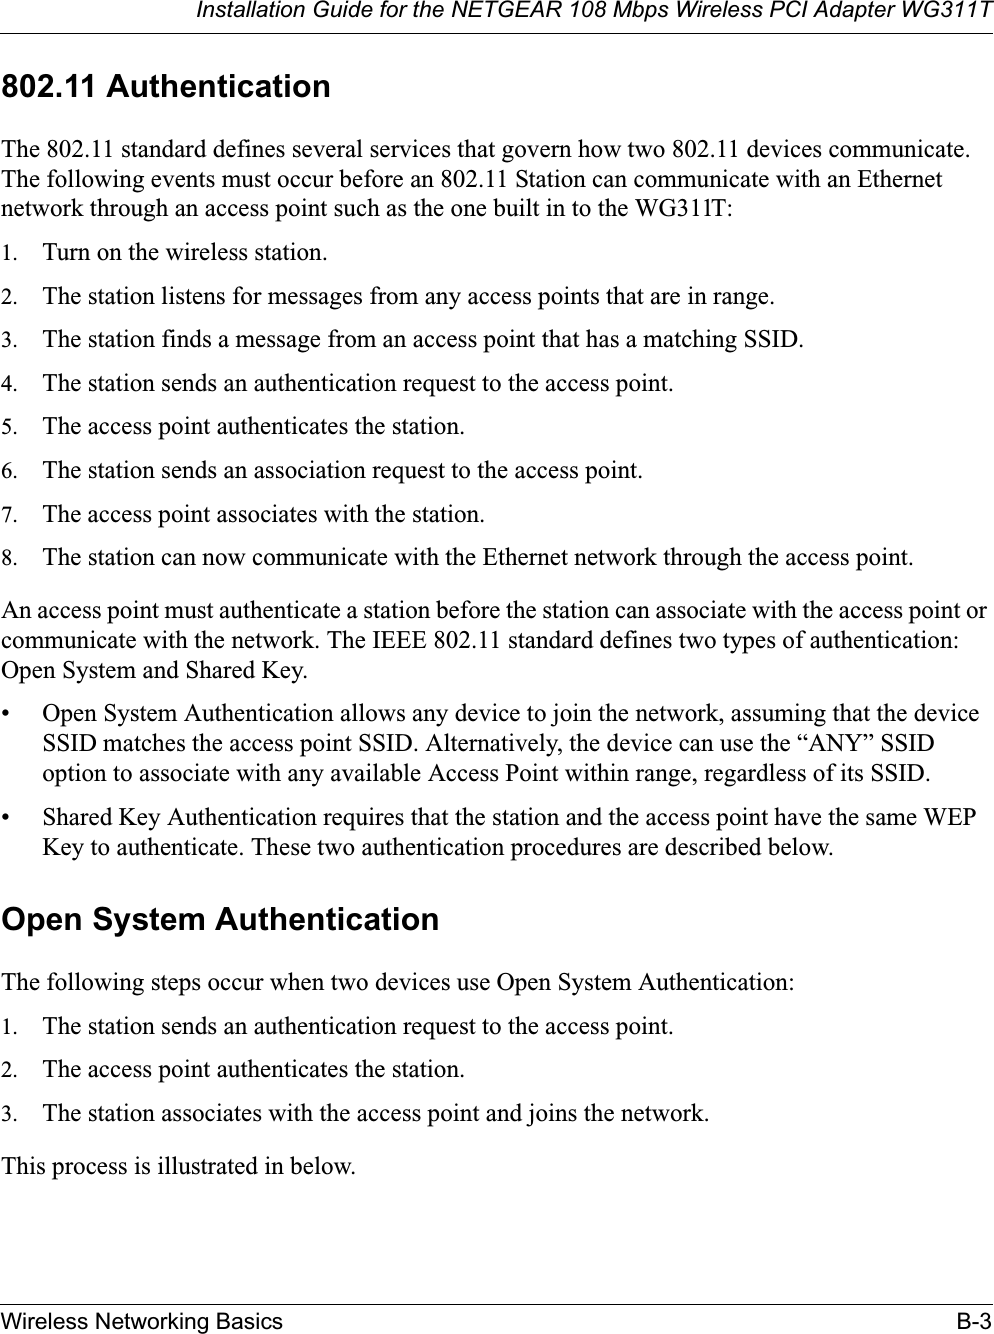 Installation Guide for the NETGEAR 108 Mbps Wireless PCI Adapter WG311TWireless Networking Basics B-3802.11 AuthenticationThe 802.11 standard defines several services that govern how two 802.11 devices communicate. The following events must occur before an 802.11 Station can communicate with an Ethernet network through an access point such as the one built in to the WG311T:1. Turn on the wireless station.2. The station listens for messages from any access points that are in range.3. The station finds a message from an access point that has a matching SSID.4. The station sends an authentication request to the access point.5. The access point authenticates the station.6. The station sends an association request to the access point.7. The access point associates with the station.8. The station can now communicate with the Ethernet network through the access point.An access point must authenticate a station before the station can associate with the access point or communicate with the network. The IEEE 802.11 standard defines two types of authentication: Open System and Shared Key.• Open System Authentication allows any device to join the network, assuming that the device SSID matches the access point SSID. Alternatively, the device can use the “ANY” SSID option to associate with any available Access Point within range, regardless of its SSID. • Shared Key Authentication requires that the station and the access point have the same WEP Key to authenticate. These two authentication procedures are described below.Open System AuthenticationThe following steps occur when two devices use Open System Authentication:1. The station sends an authentication request to the access point.2. The access point authenticates the station.3. The station associates with the access point and joins the network.This process is illustrated in below.